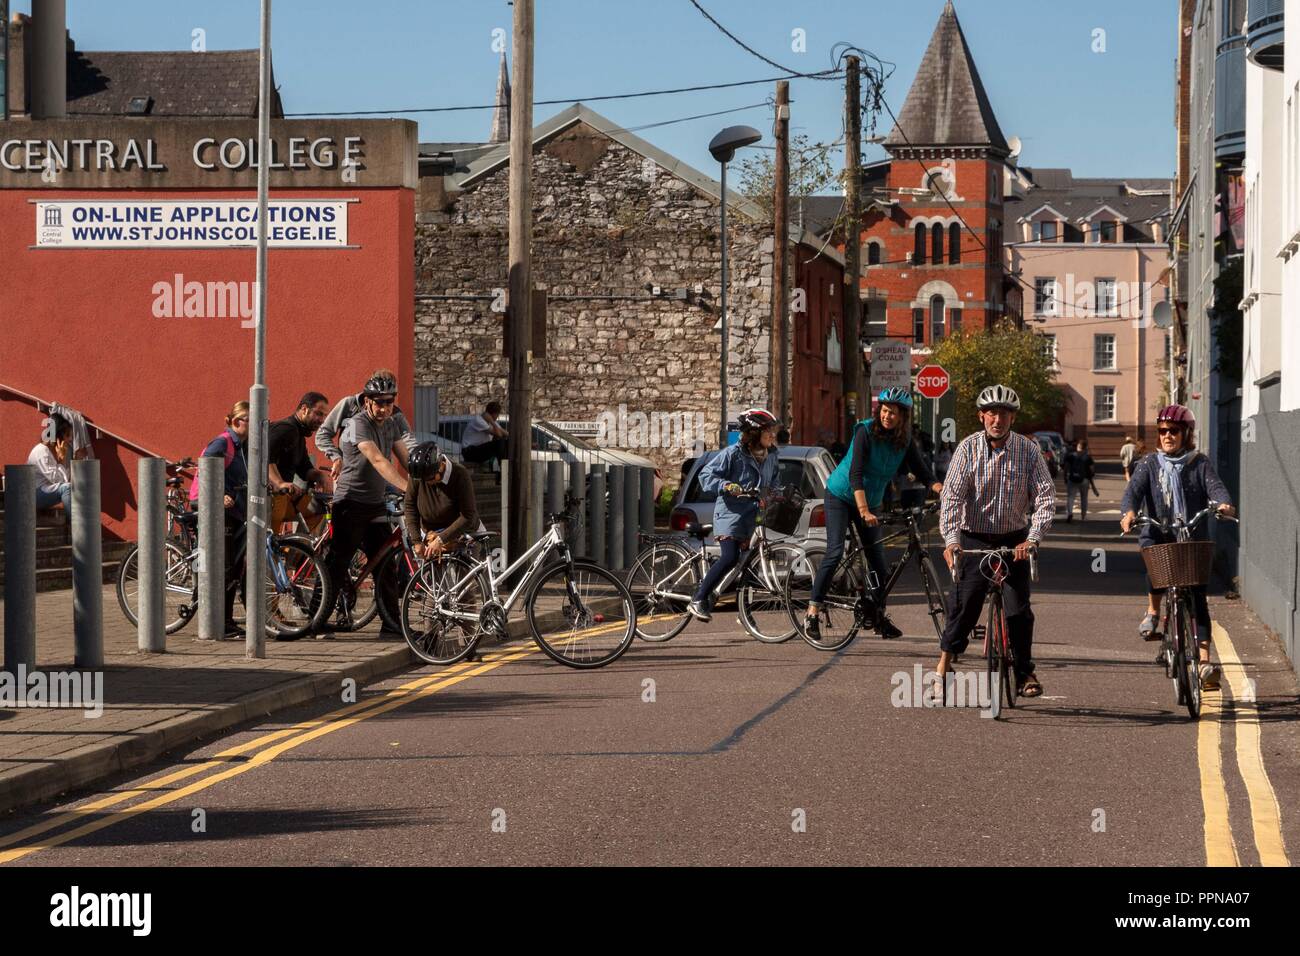 Cork, Ireland. 27th Sept, 2018.   St Johns Central College Student Staff Cycle for Campus Cycle Week, Cork City. Today at 1pm both students and staff gathered in the plaza of St Johns Central College on the annual student staff cycle. The cycle was lead by John Dean, a teacher in the college. The student staff cycle was a part of Campus Cycle Week which runs from September 24th to the 28th. Credit: Damian Coleman/Alamy Live News. Stock Photo